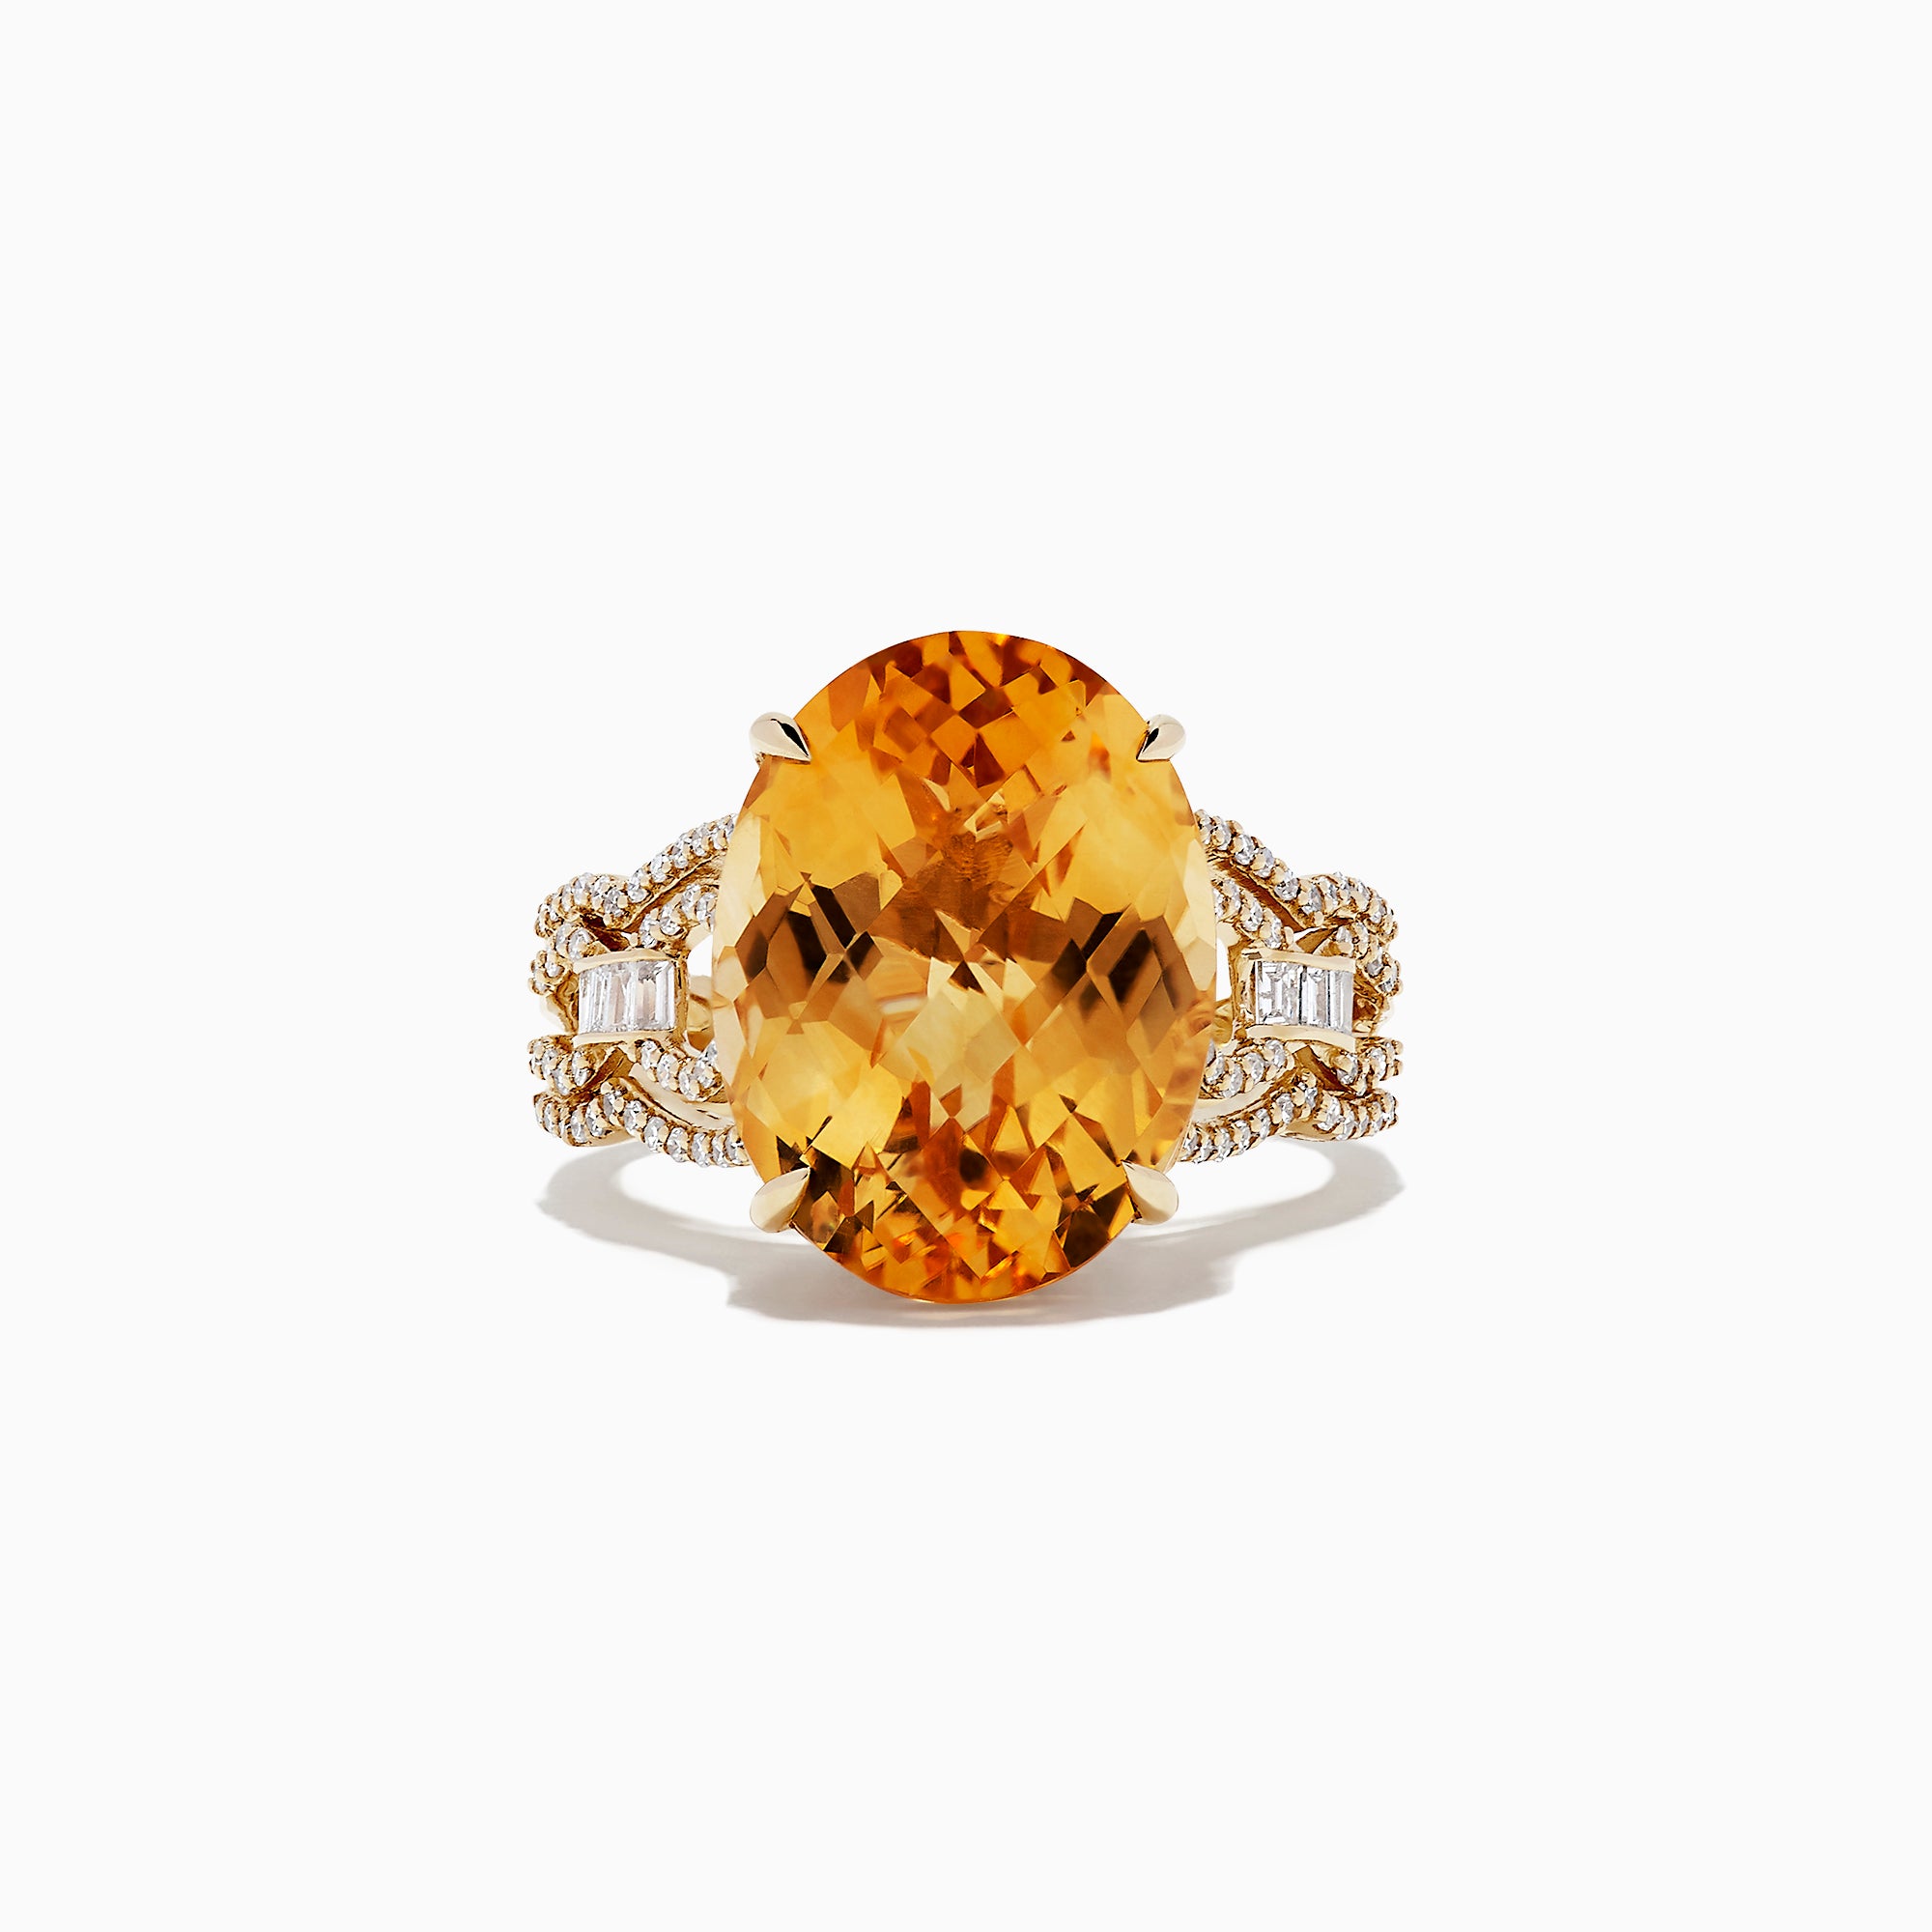 Effy Sunset 14K Yellow Gold Citrine and Diamond Cocktail Ring, 9.72 TCW